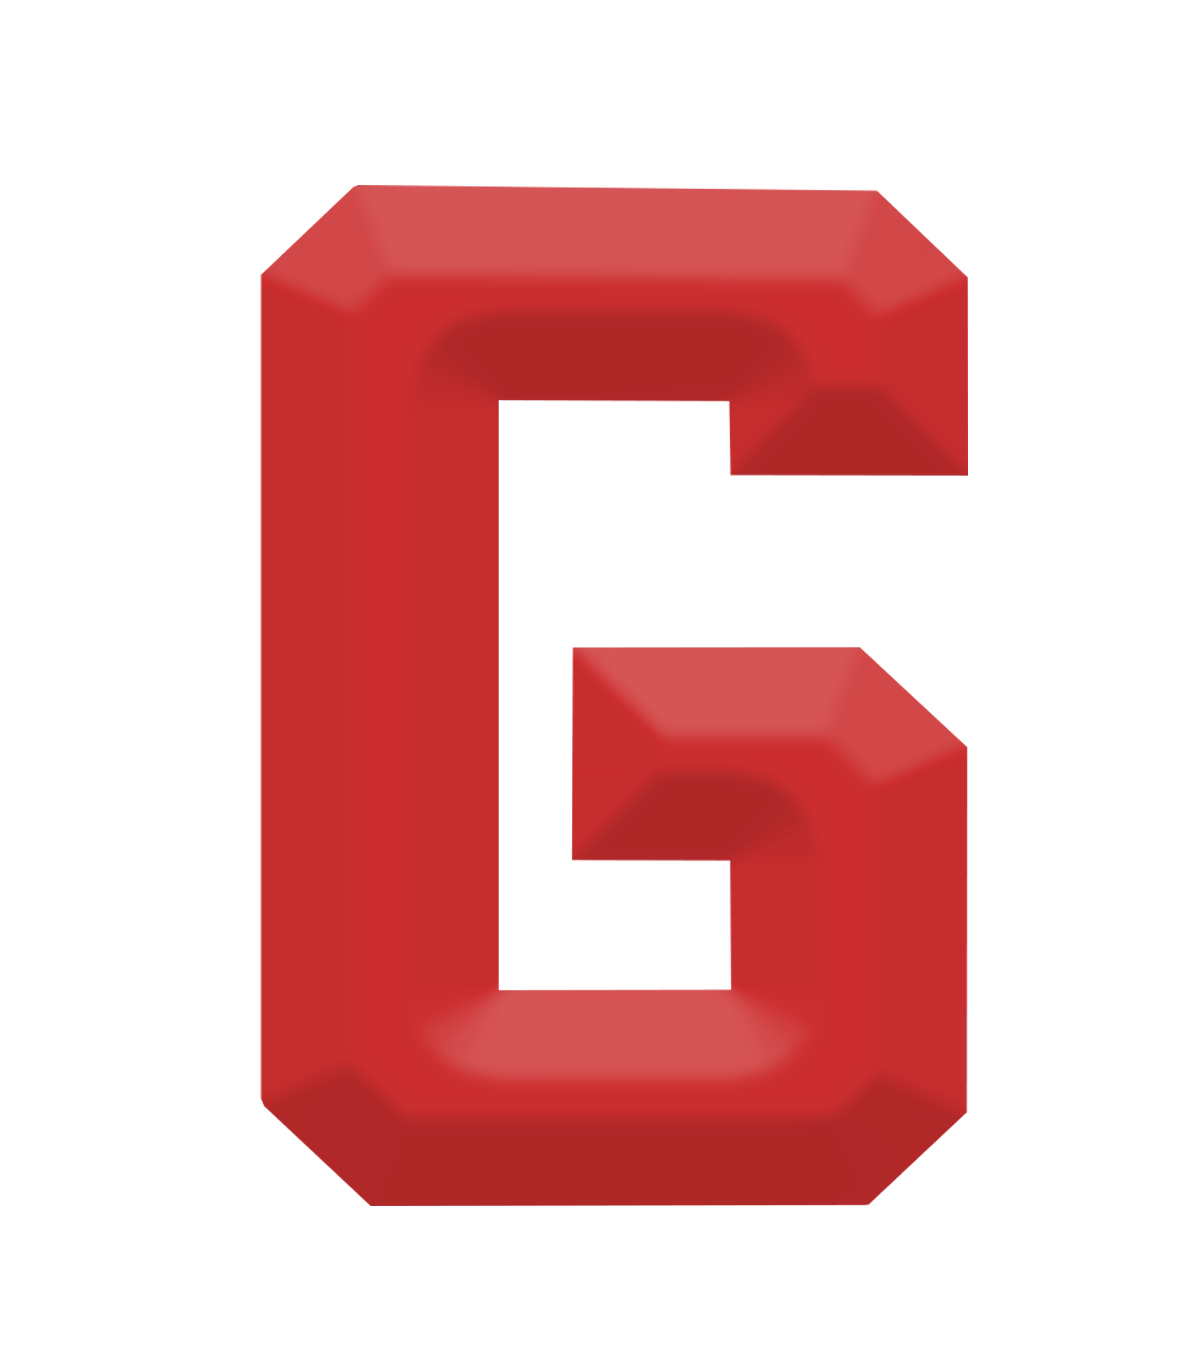 The letter G